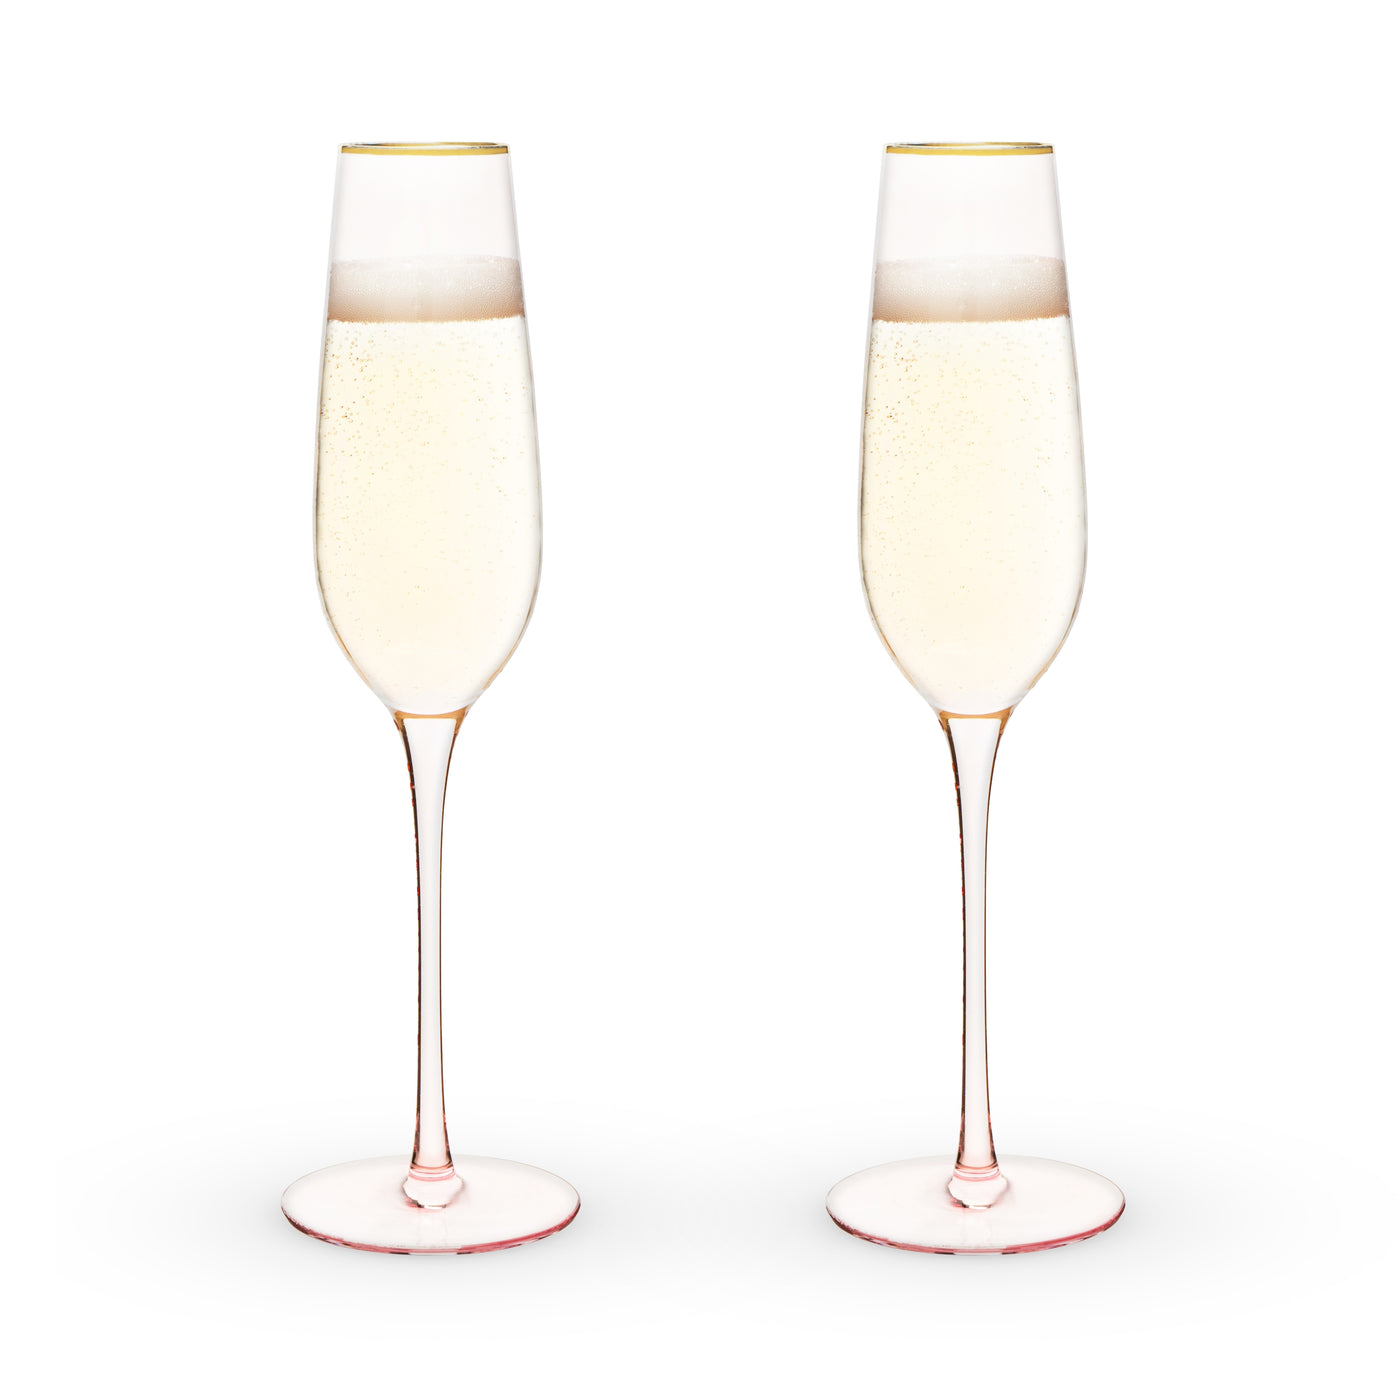 Rose Crystal Champagne Flute Set by Twine